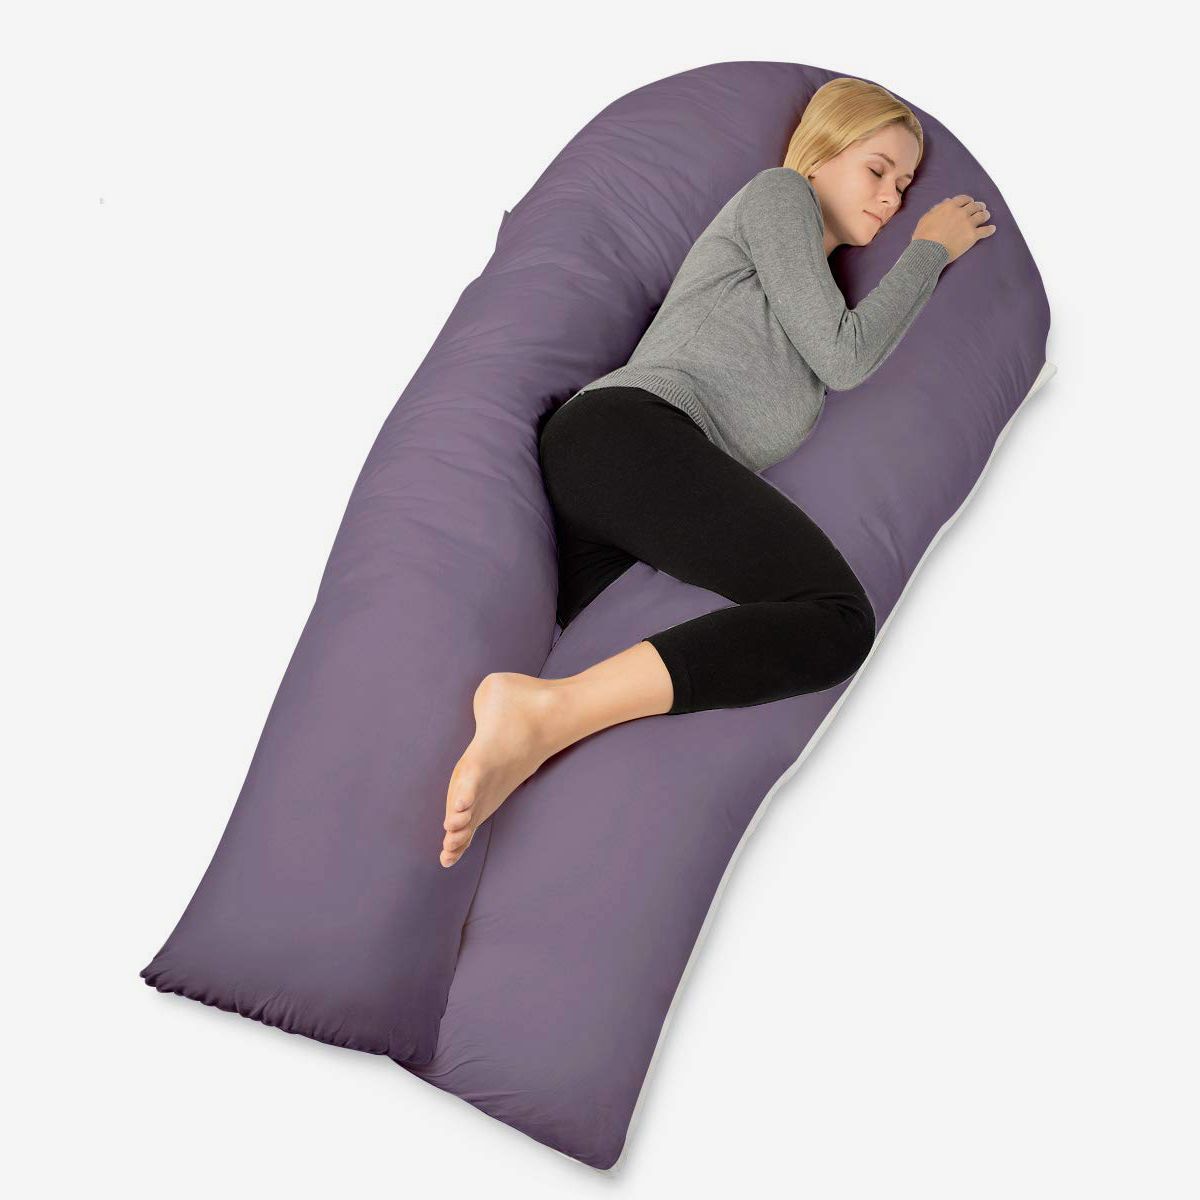 body pillow shaped like a person